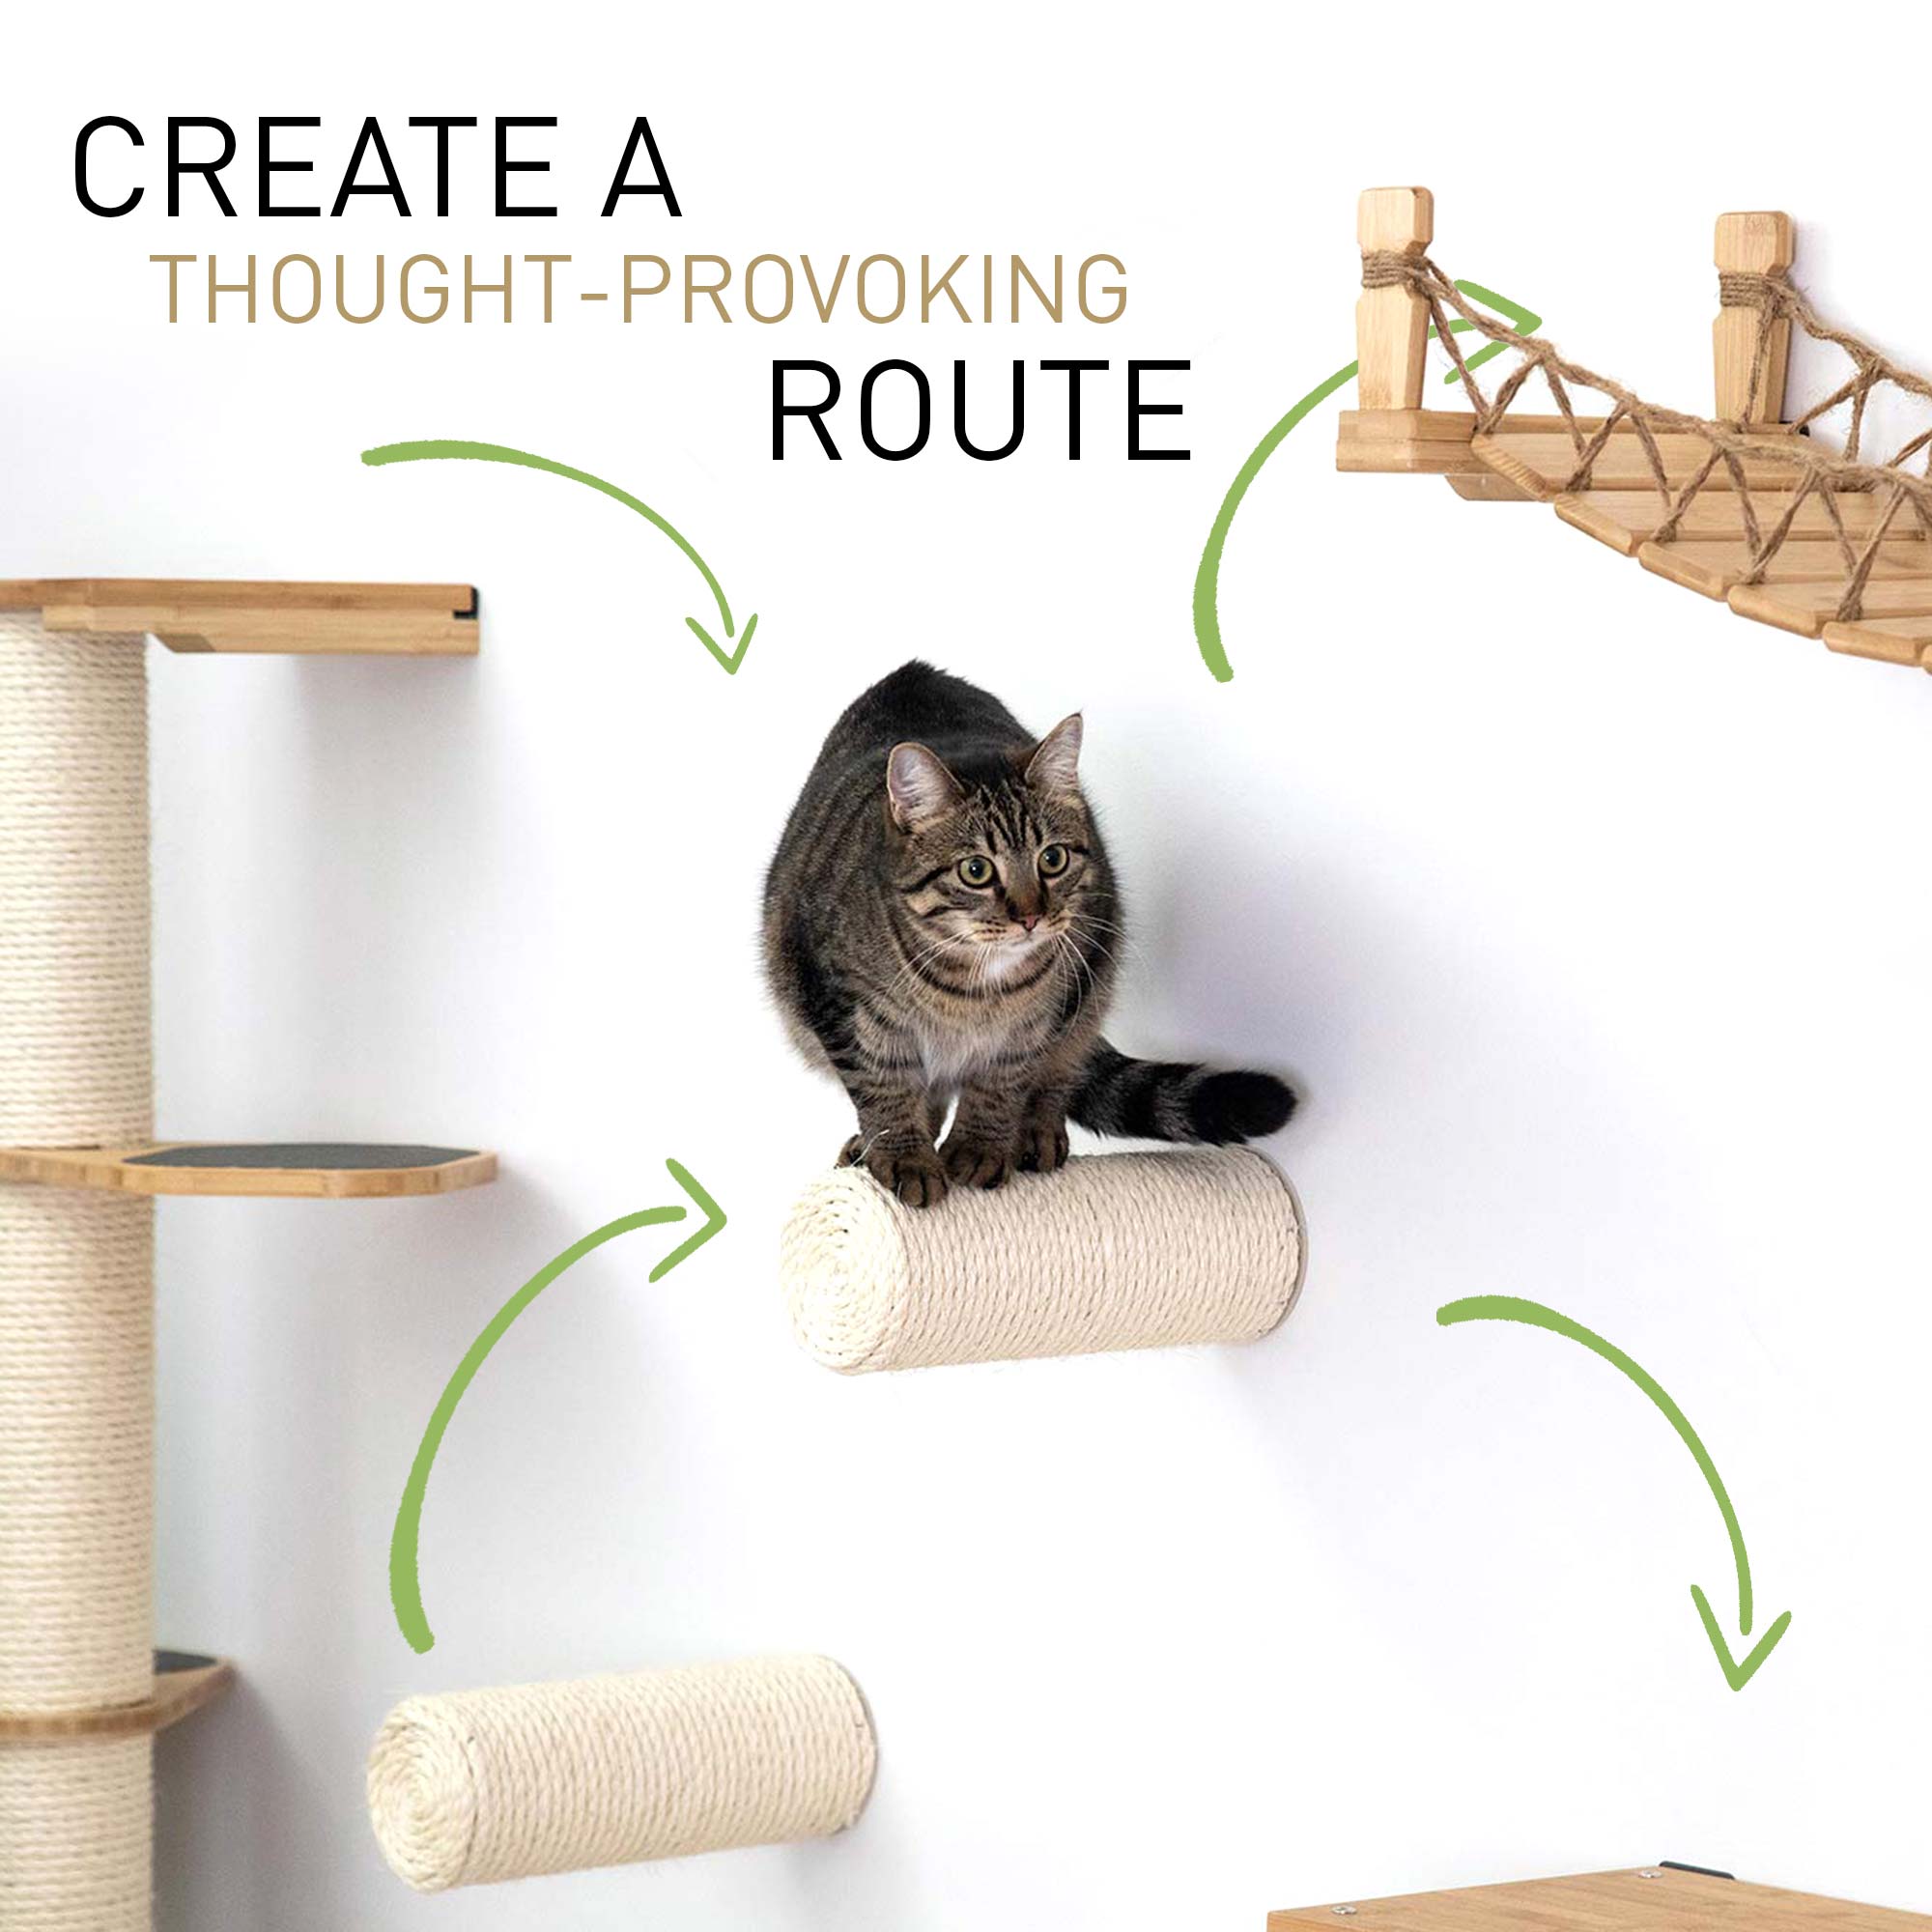 Graphic of a tabby cat trying to decide which way to go through various shelves and bridges. Text reads: "Create a thought-provoking route" and is illustrated with 4 green arrows showing different routes the cat could take.